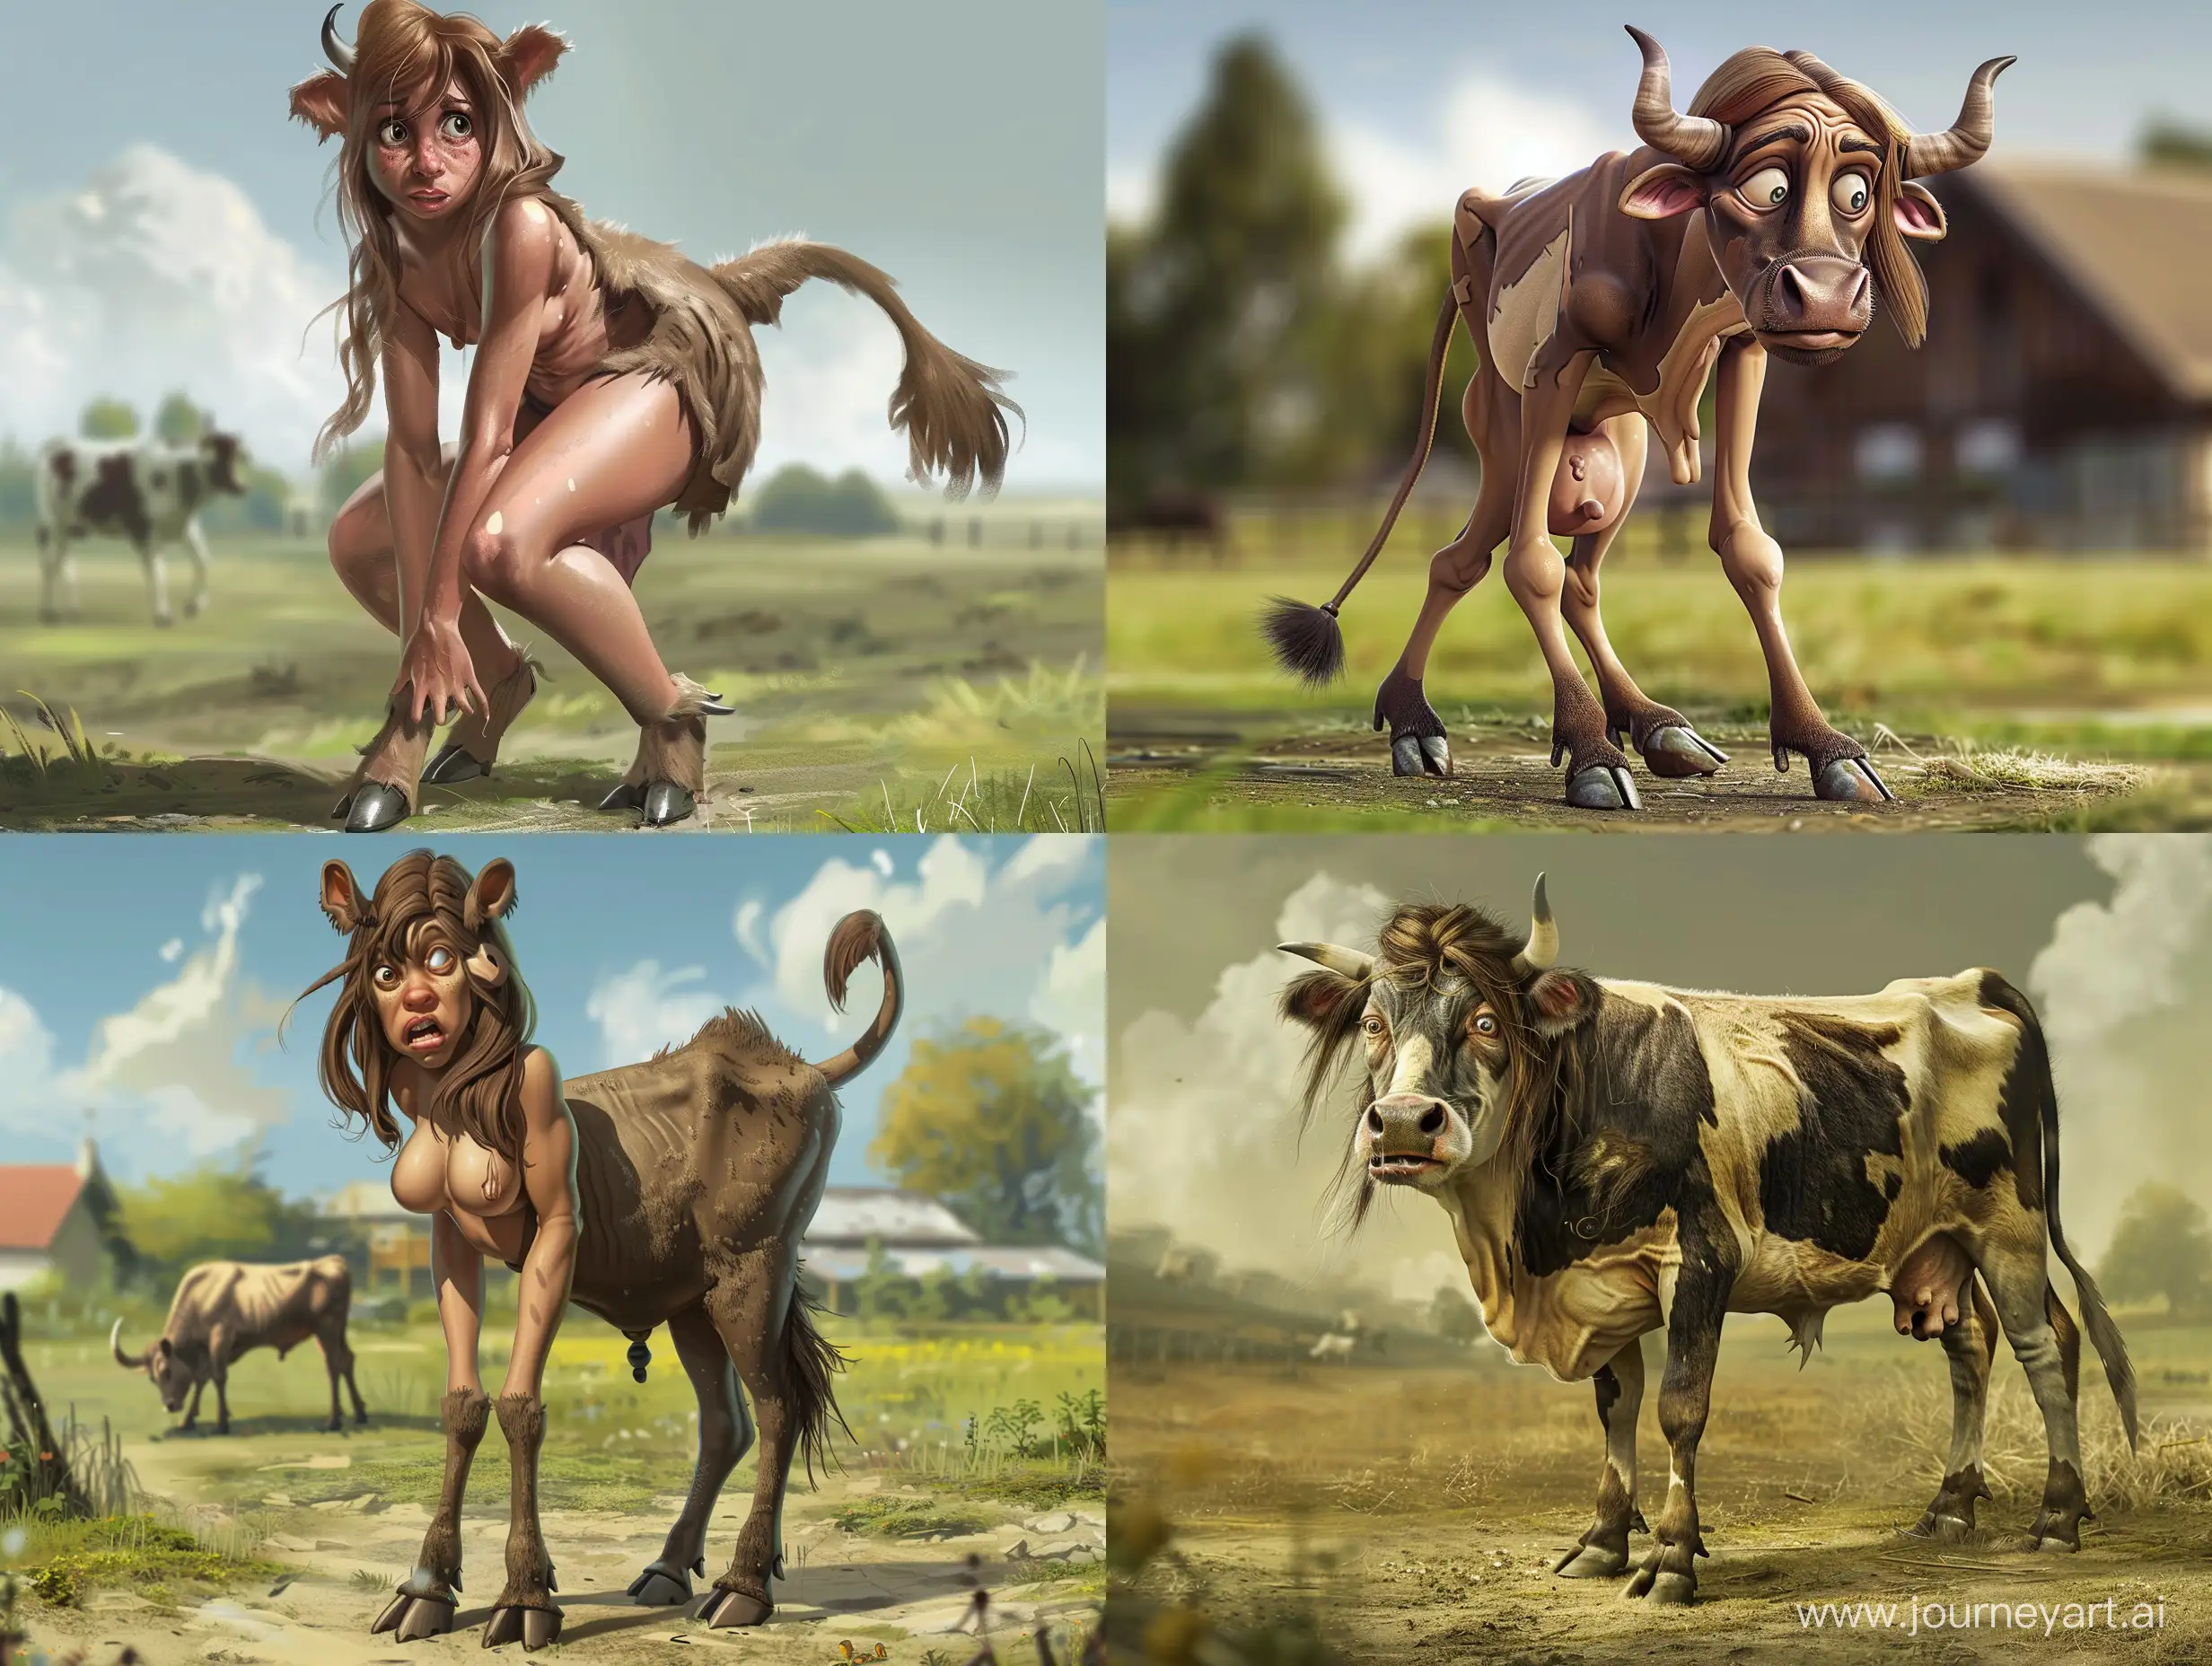 An hybrid between a woman and a cow. She has hooves, fur and a tail. She is standing on all fours in a pasture with a confused look. Full body picture, realistic lighting